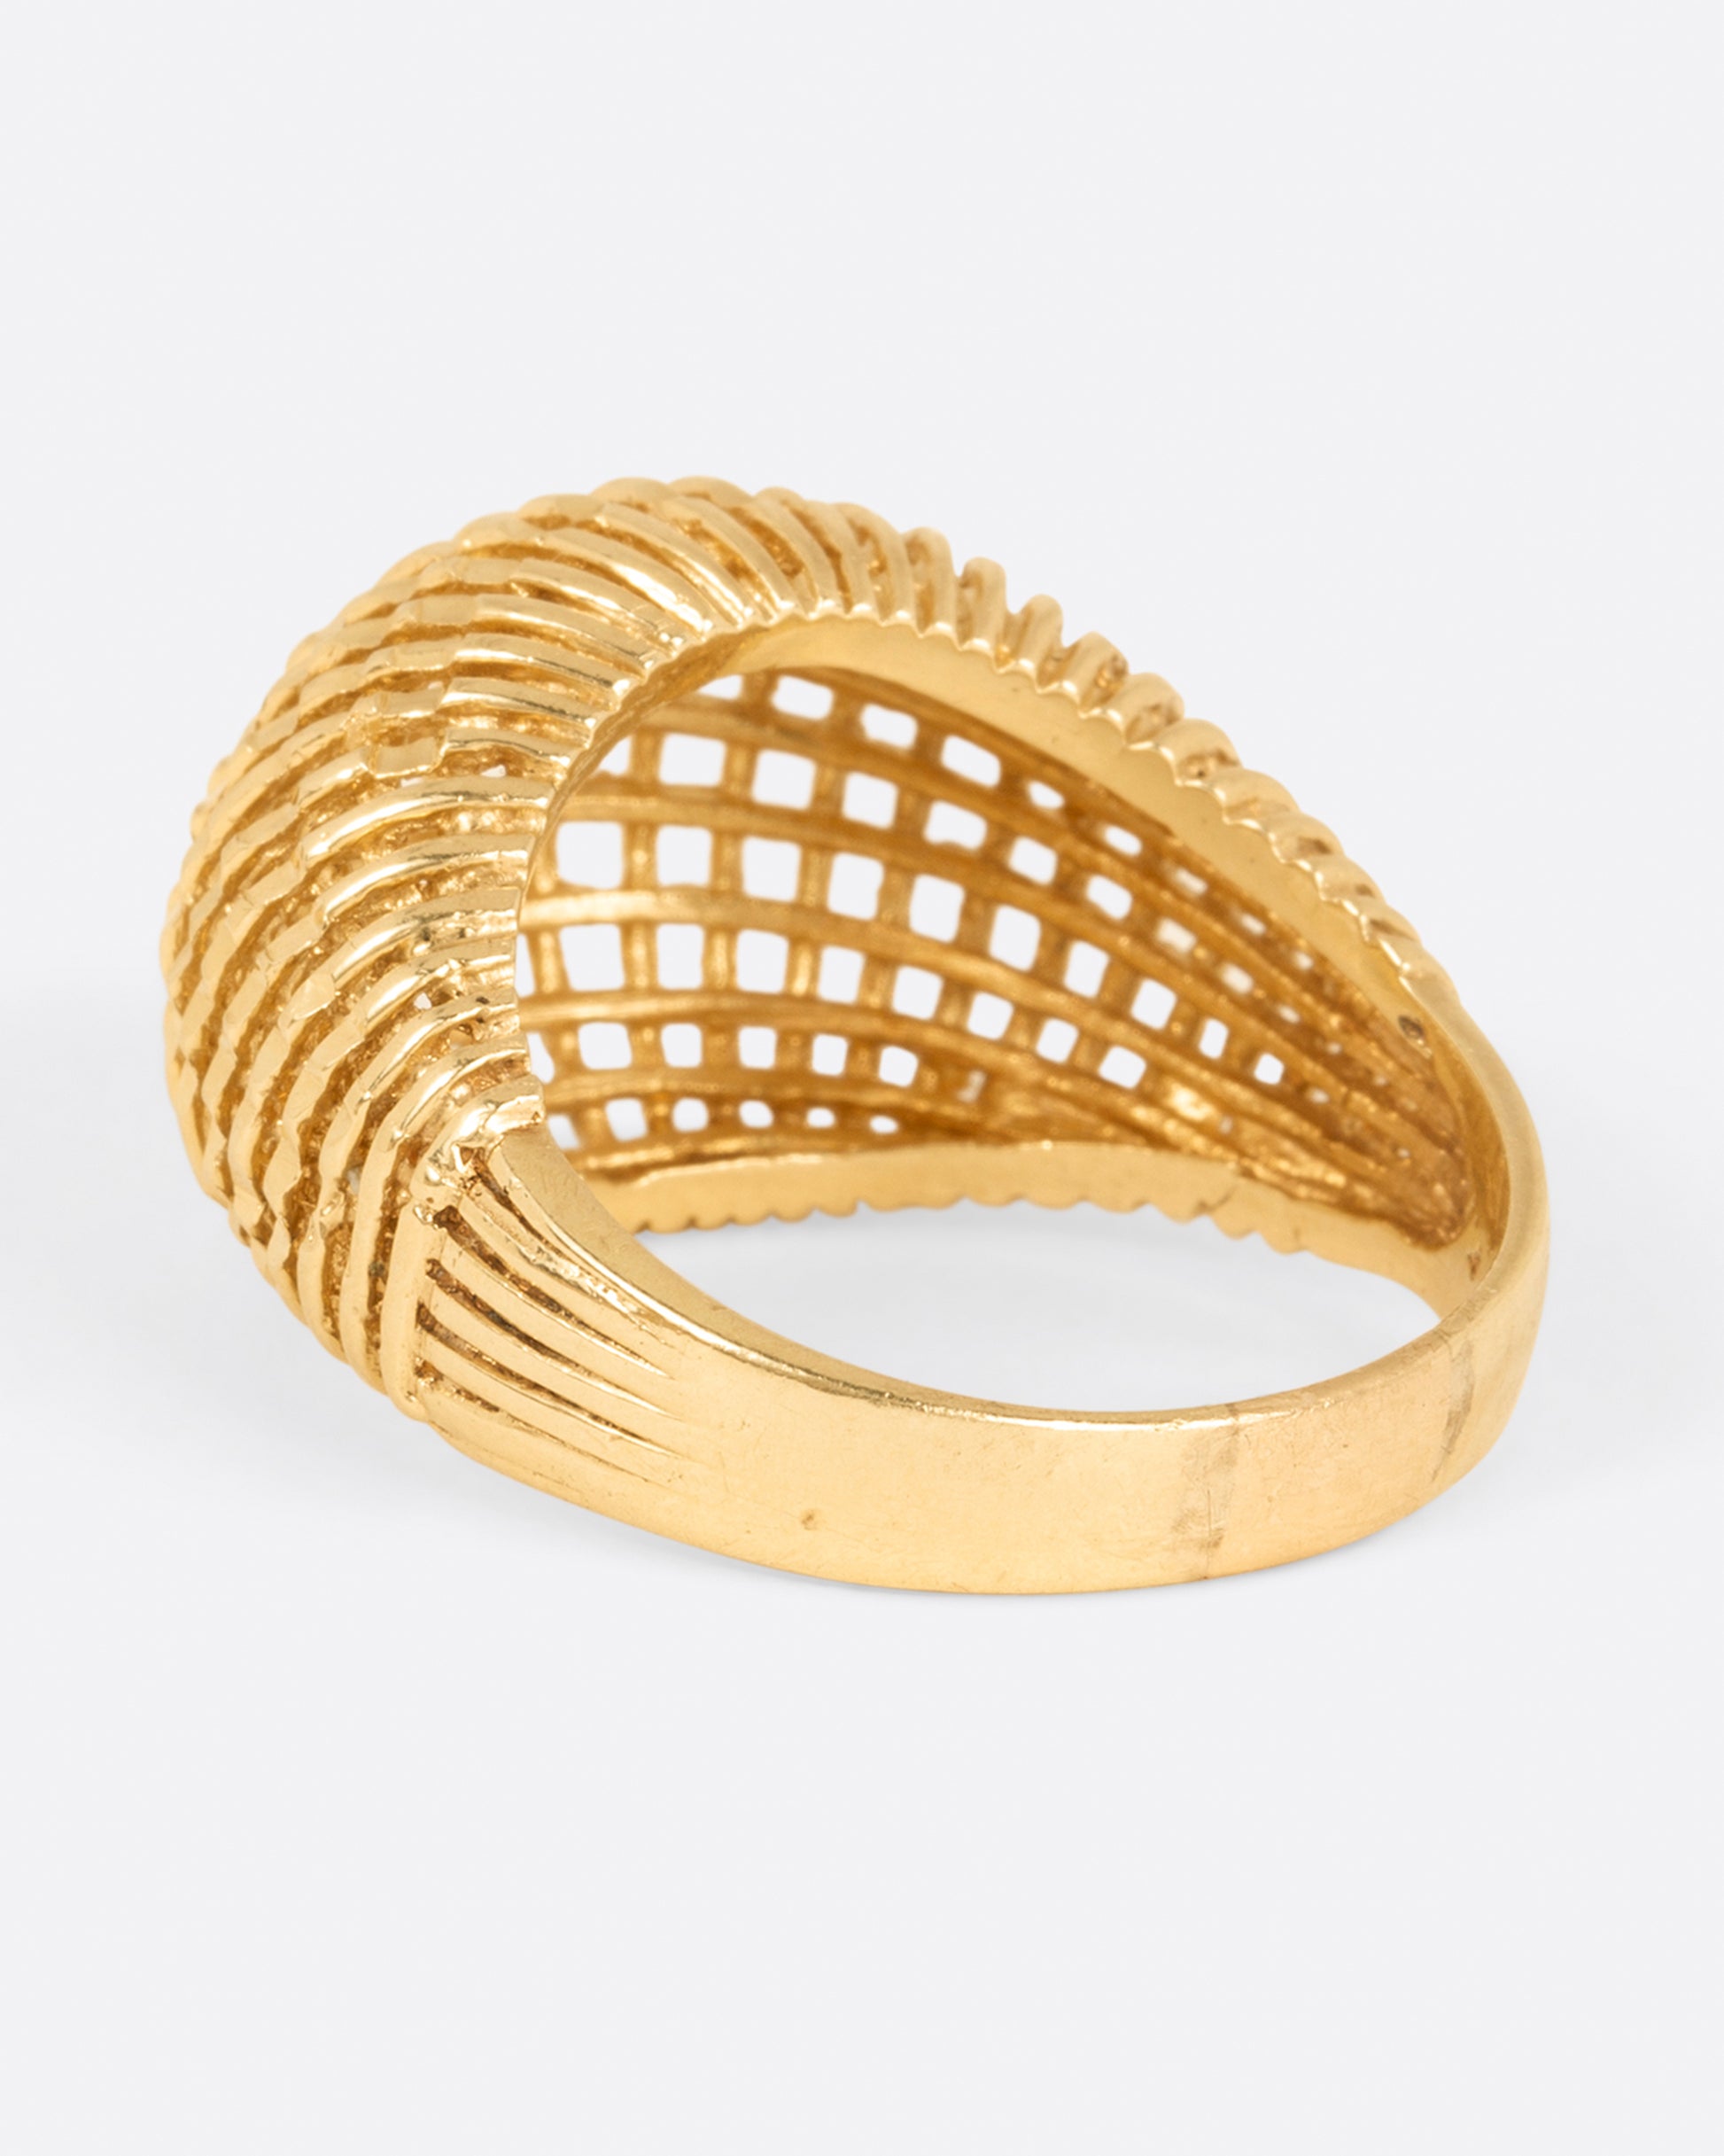 A woven yellow gold dome ring, shown from the side.